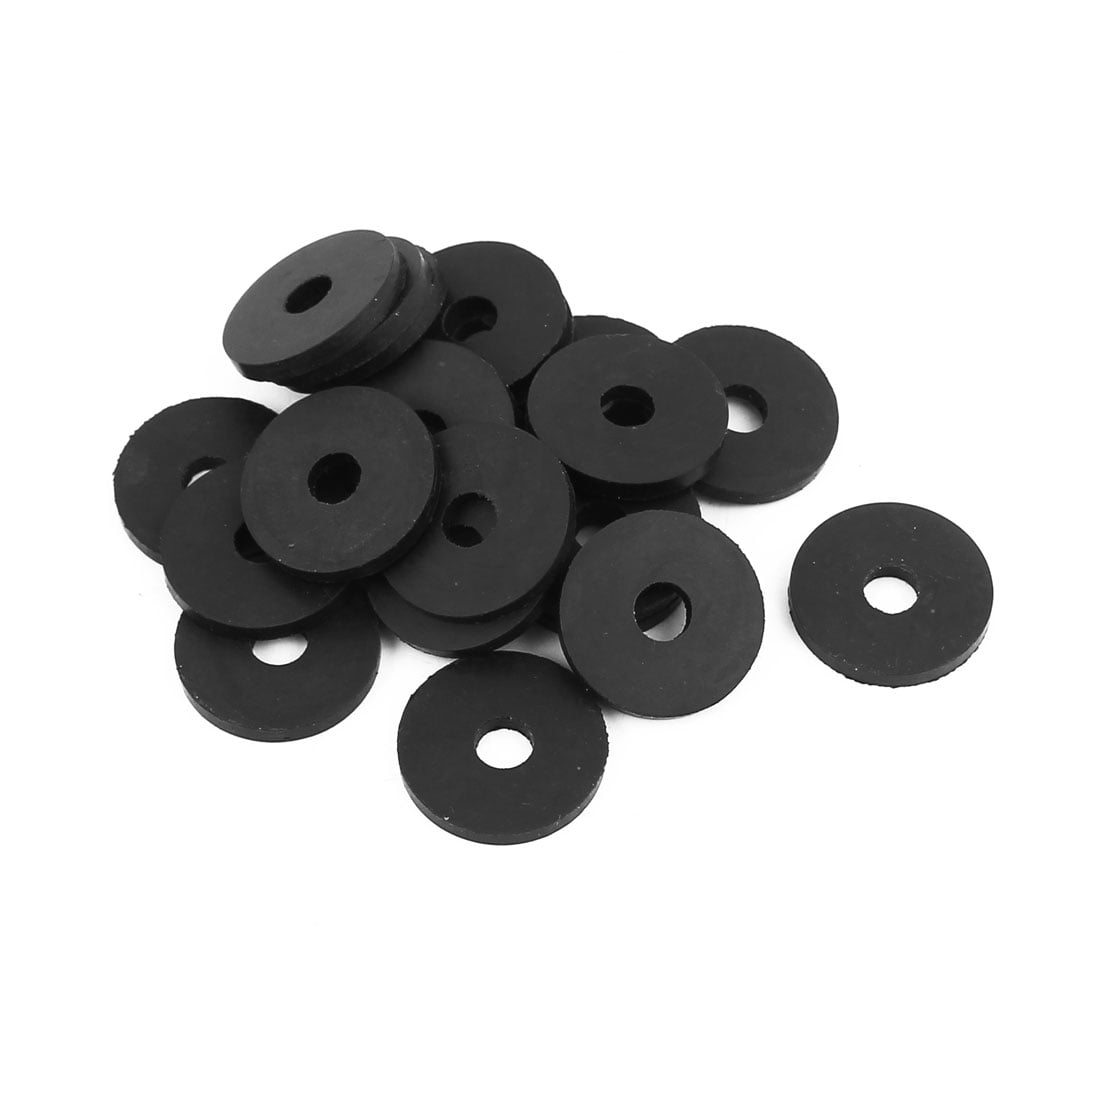 5 X 18 X 2mm O Ring Hose Gasket Flat Rubber Washer Lot For Faucet